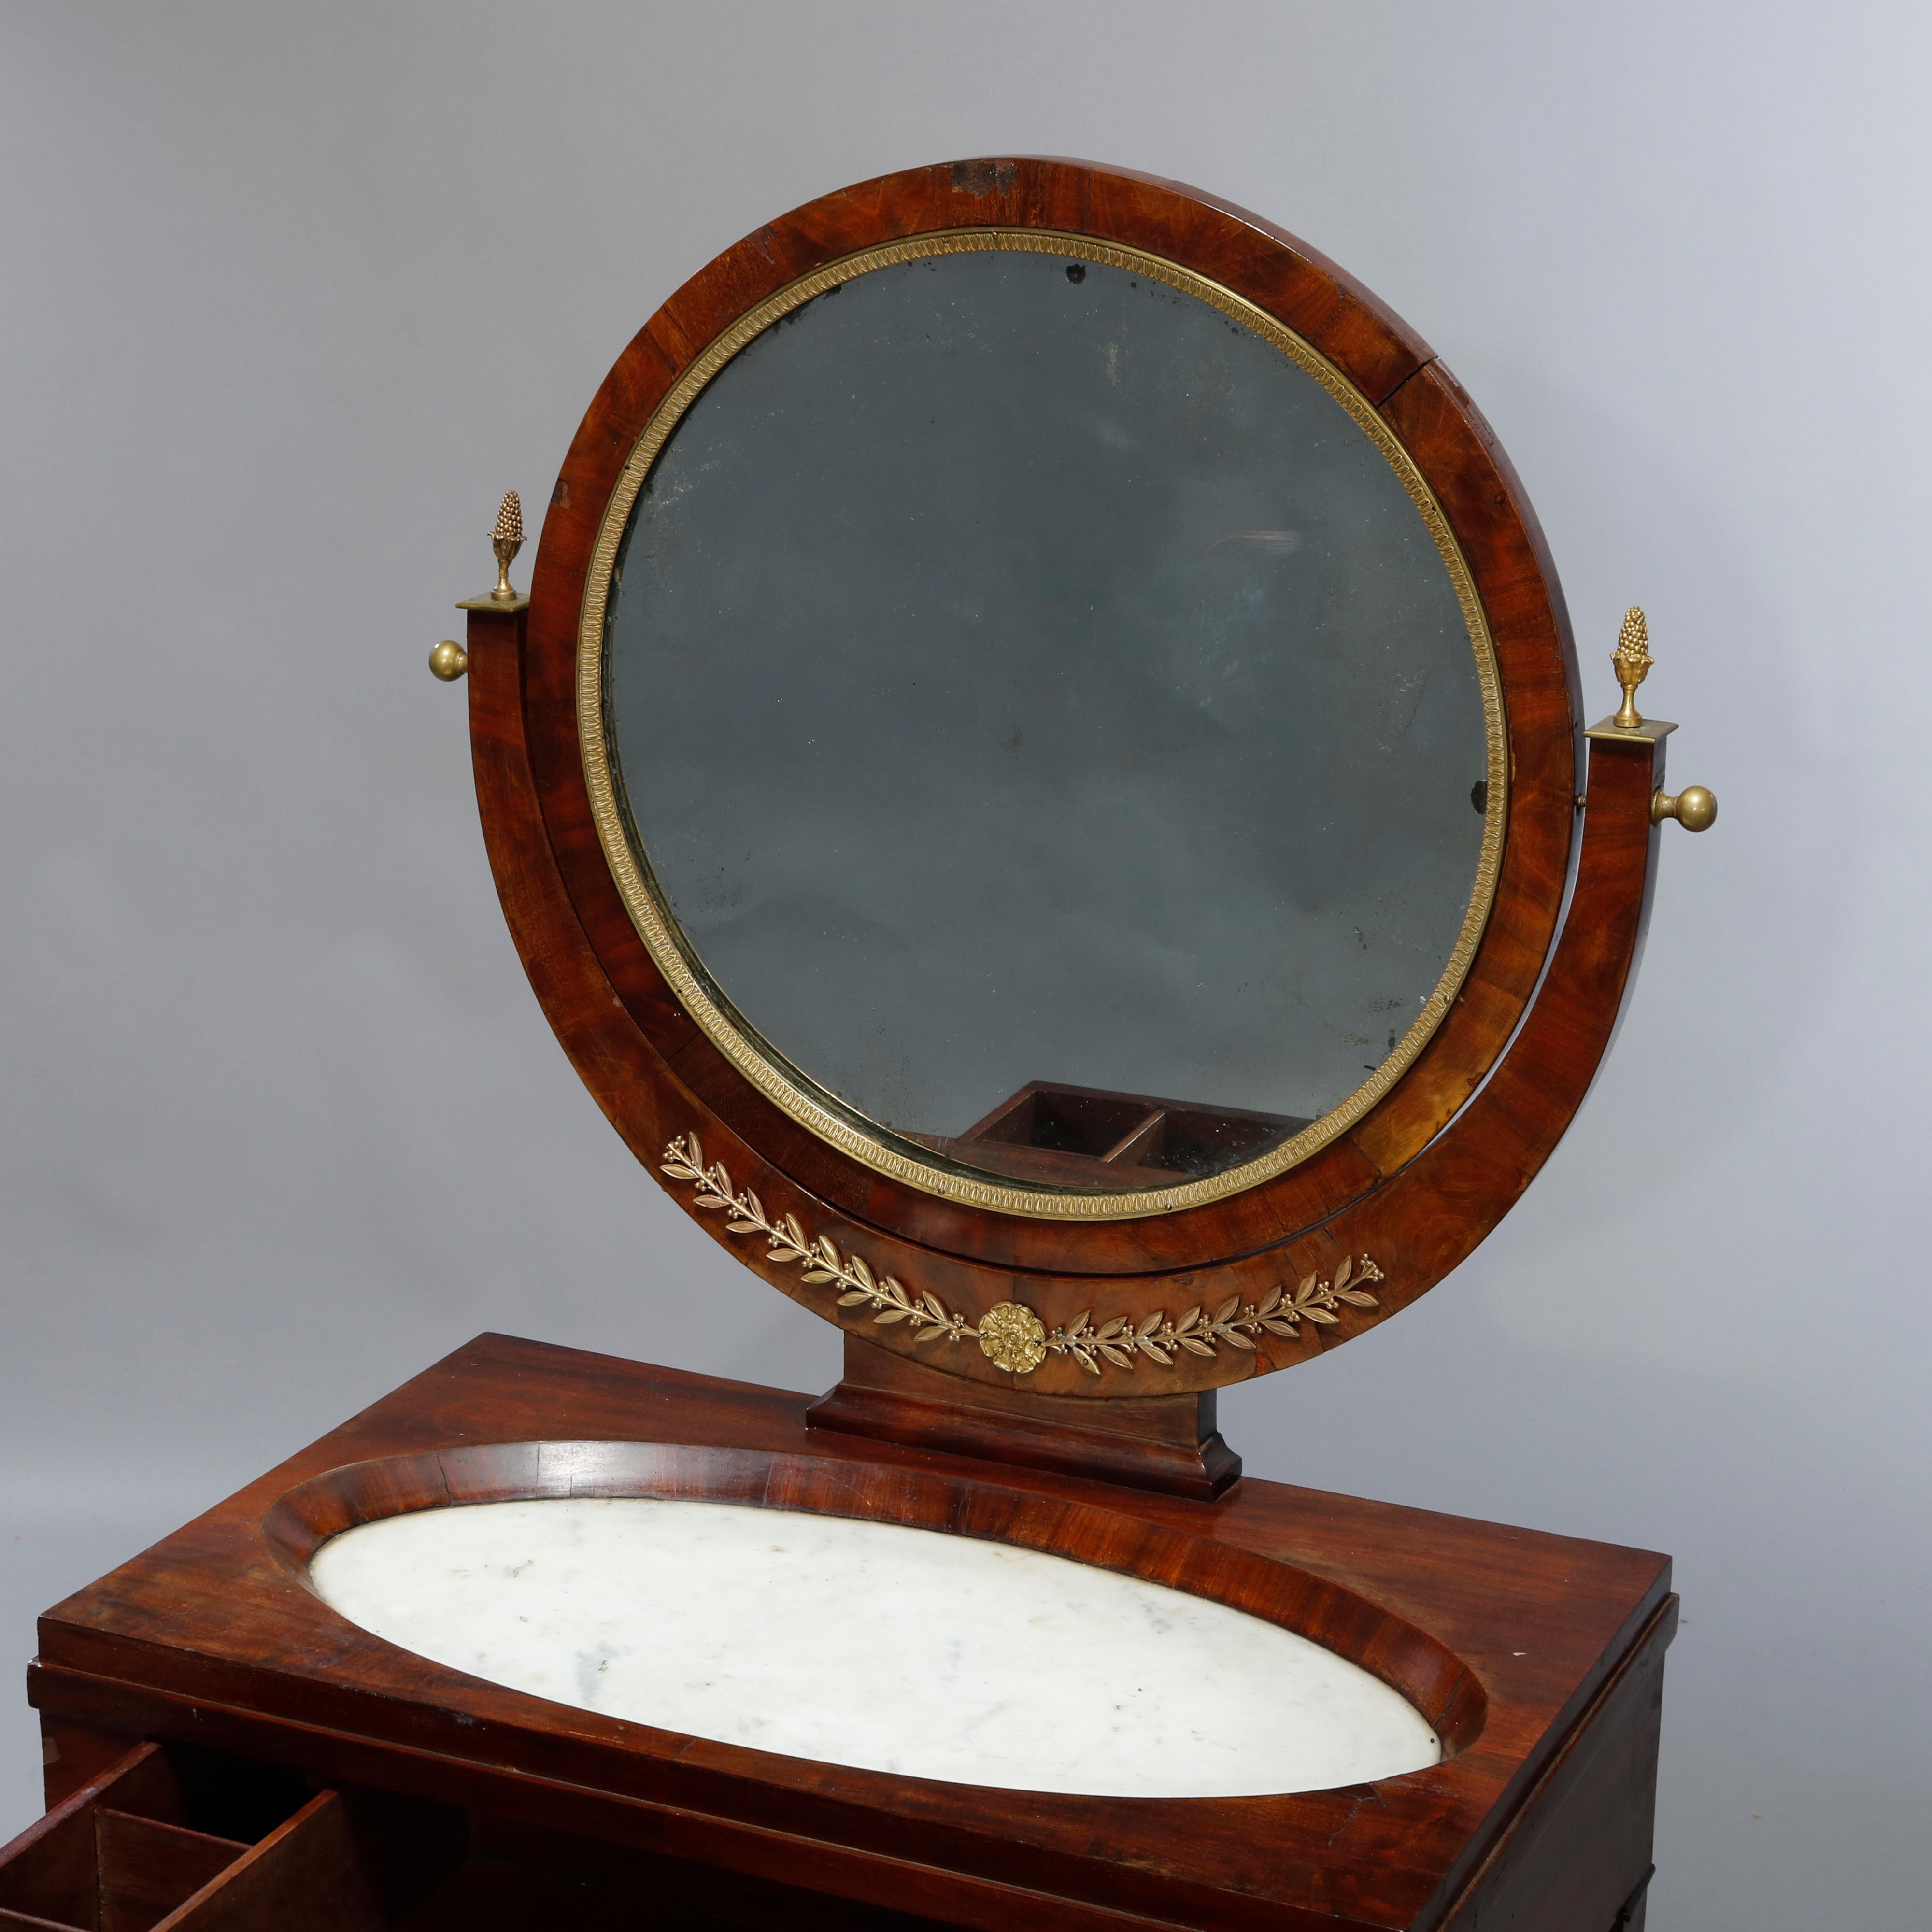 An antique French Empire dressing table offers flame mahogany construction with round swivel mirror having ormolu trim and seated in cradle having foliate ormolu mount and finals surmounting single drawer base with inset marble top and Doric column